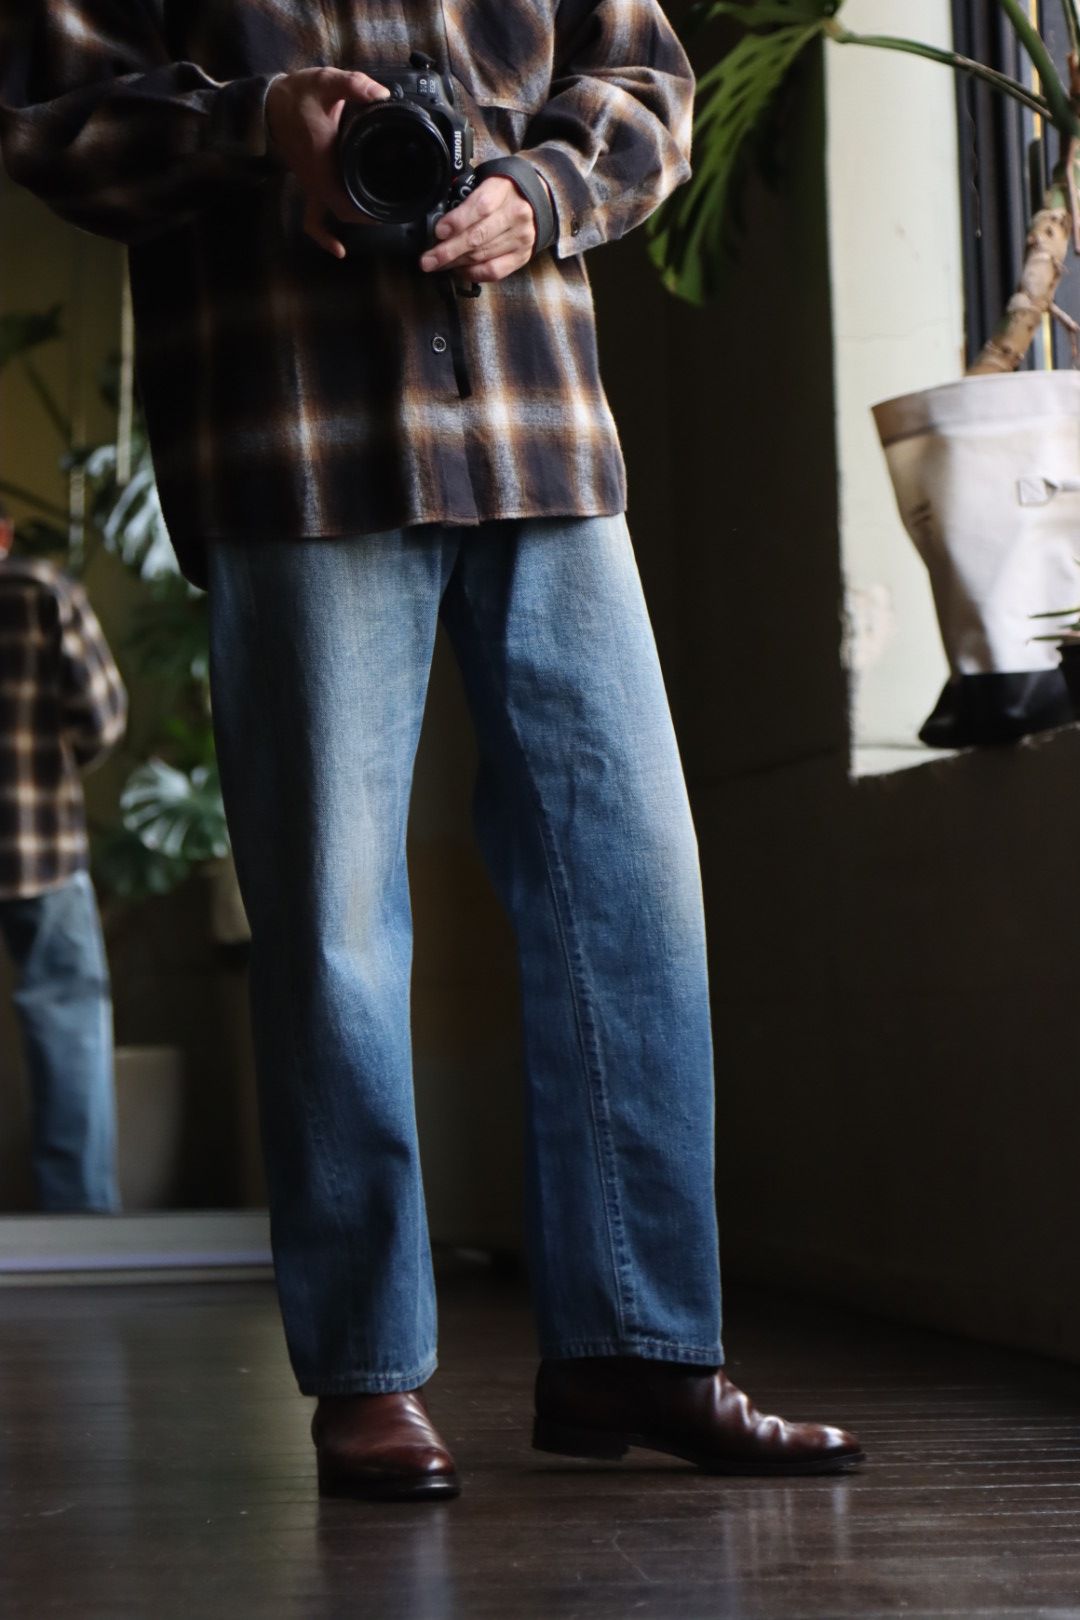 A.PRESSE - アプレッセ 23Style No.2 Washed Denim Pants(23SAP ...